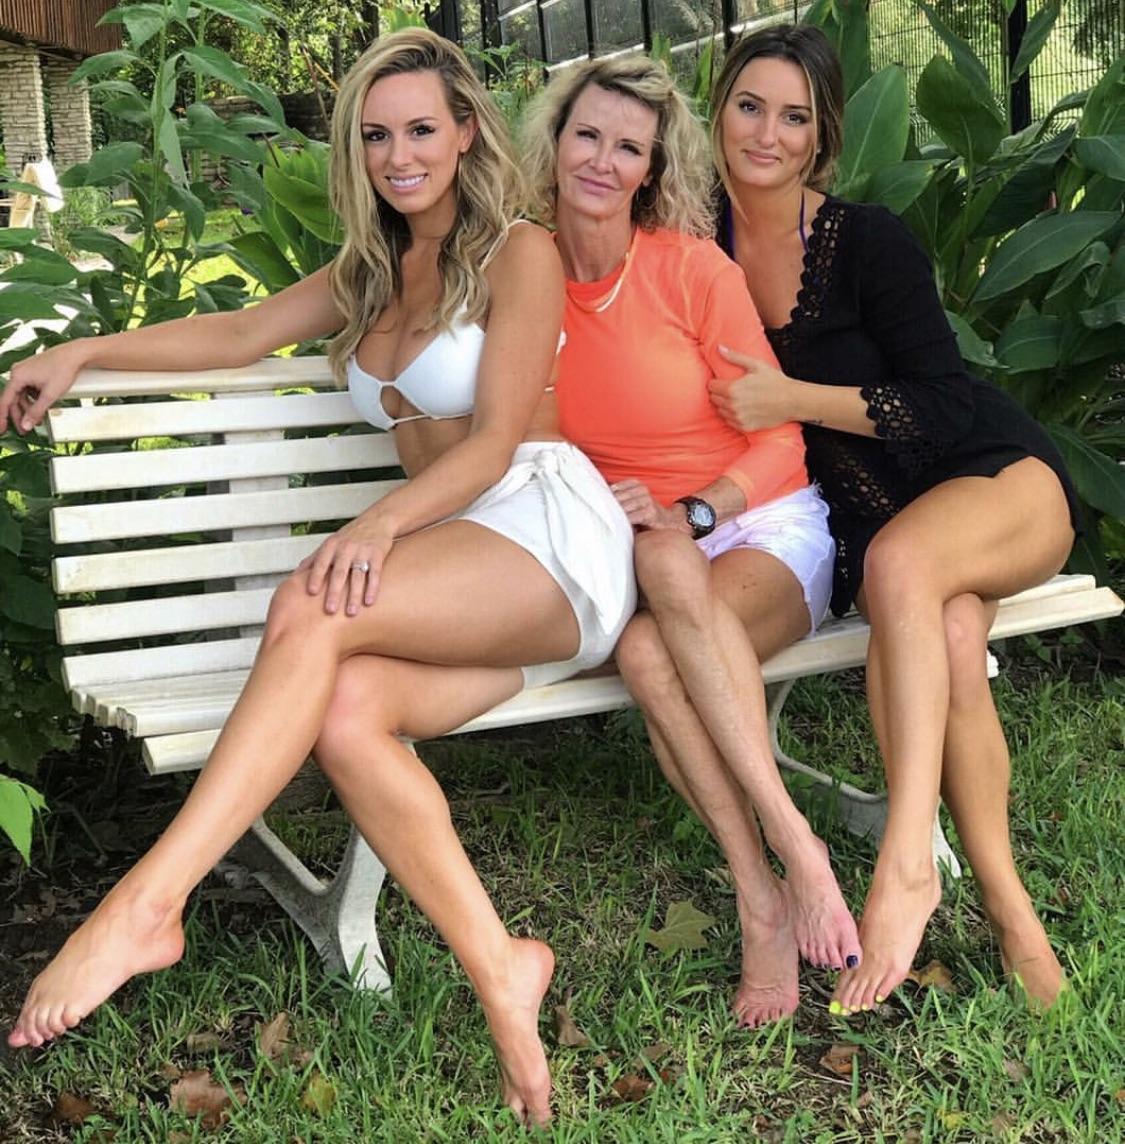 Mom, Grandmother, or daughter?